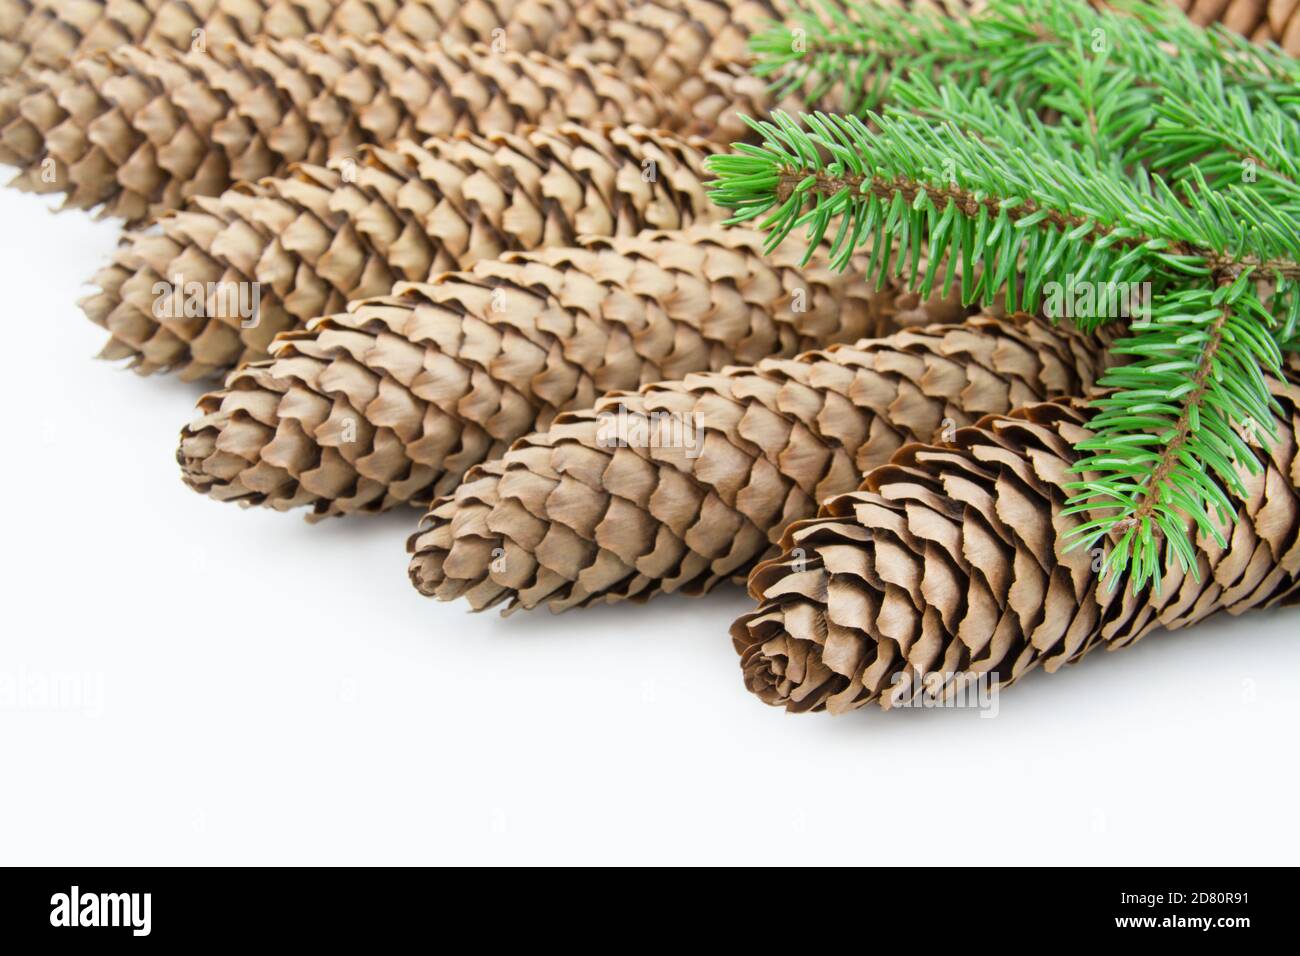 Spruce tree cones against white background Stock Photo